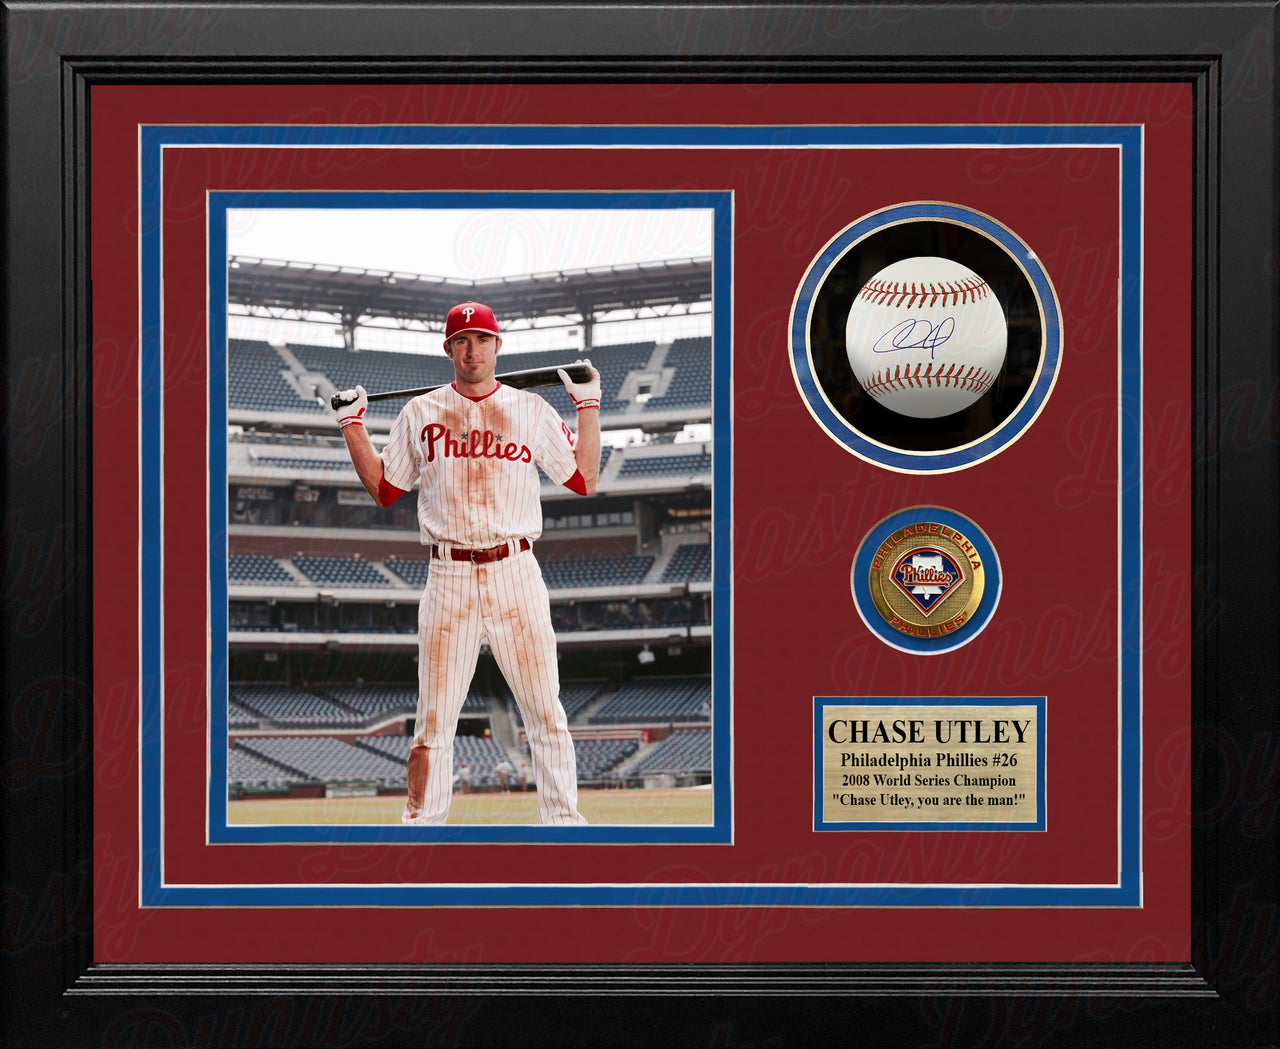 Jimmy Rollins Trophy Autographed Philadelphia Phillies 16x20 Framed Photo:  World Series Champs (JSA) - Dynasty Sports & Framing